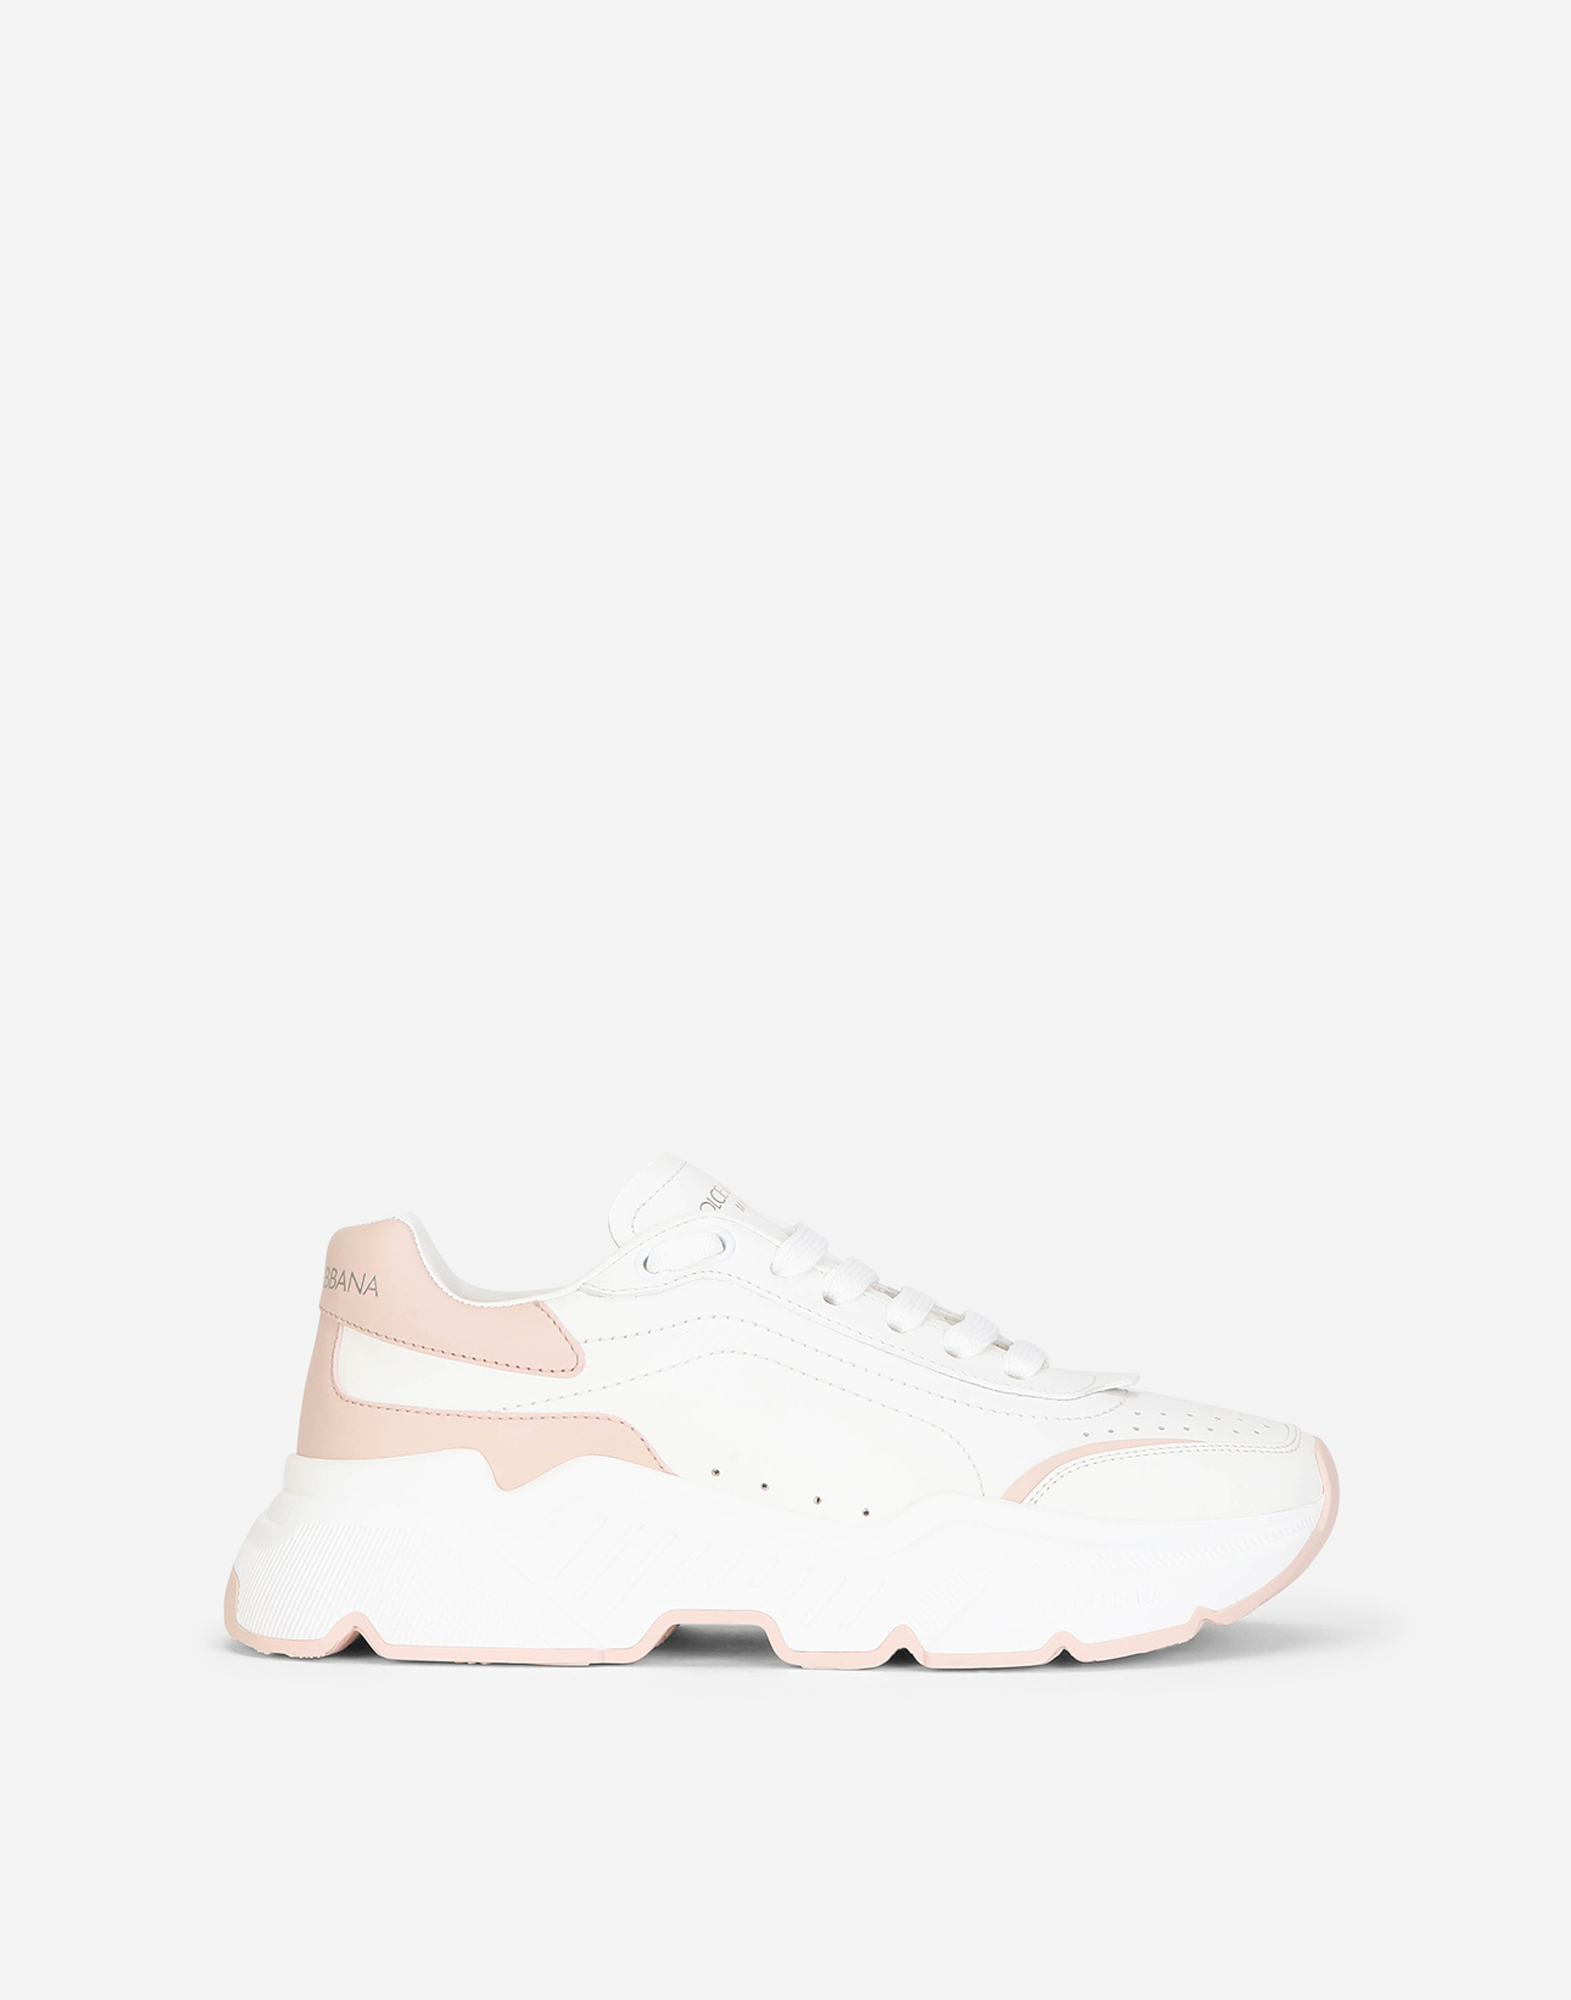 Calfskin nappa Daymaster sneakers in White/Pink